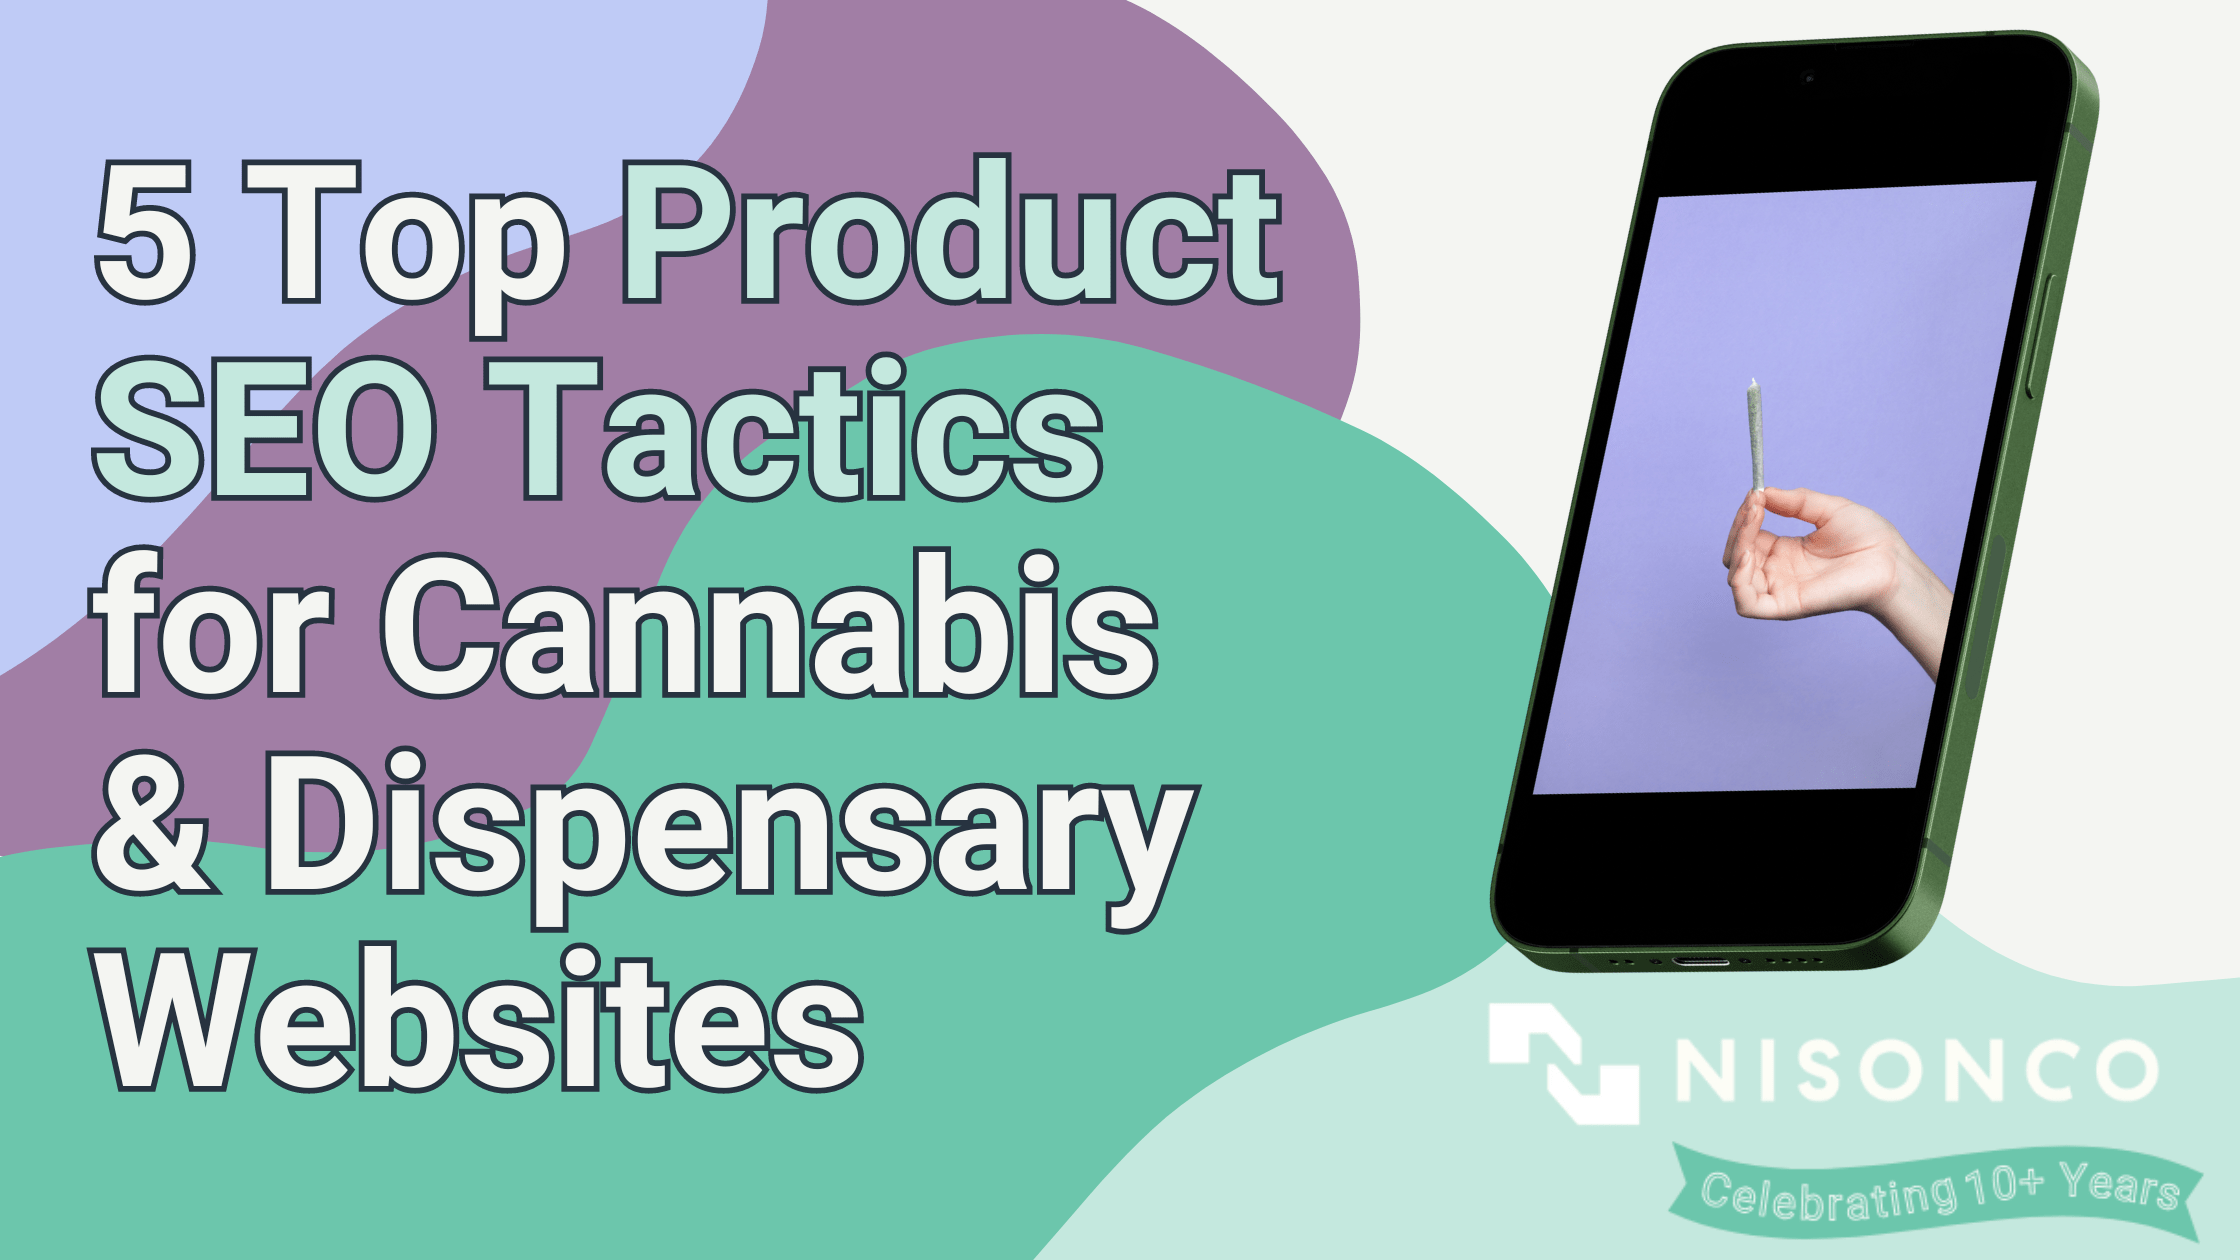 The text, '5 Top Product SEO Tactics for Cannabis and Dispensary Websites' is to the left of an image of a smartphone showing a hand holding out a cannabis joint.